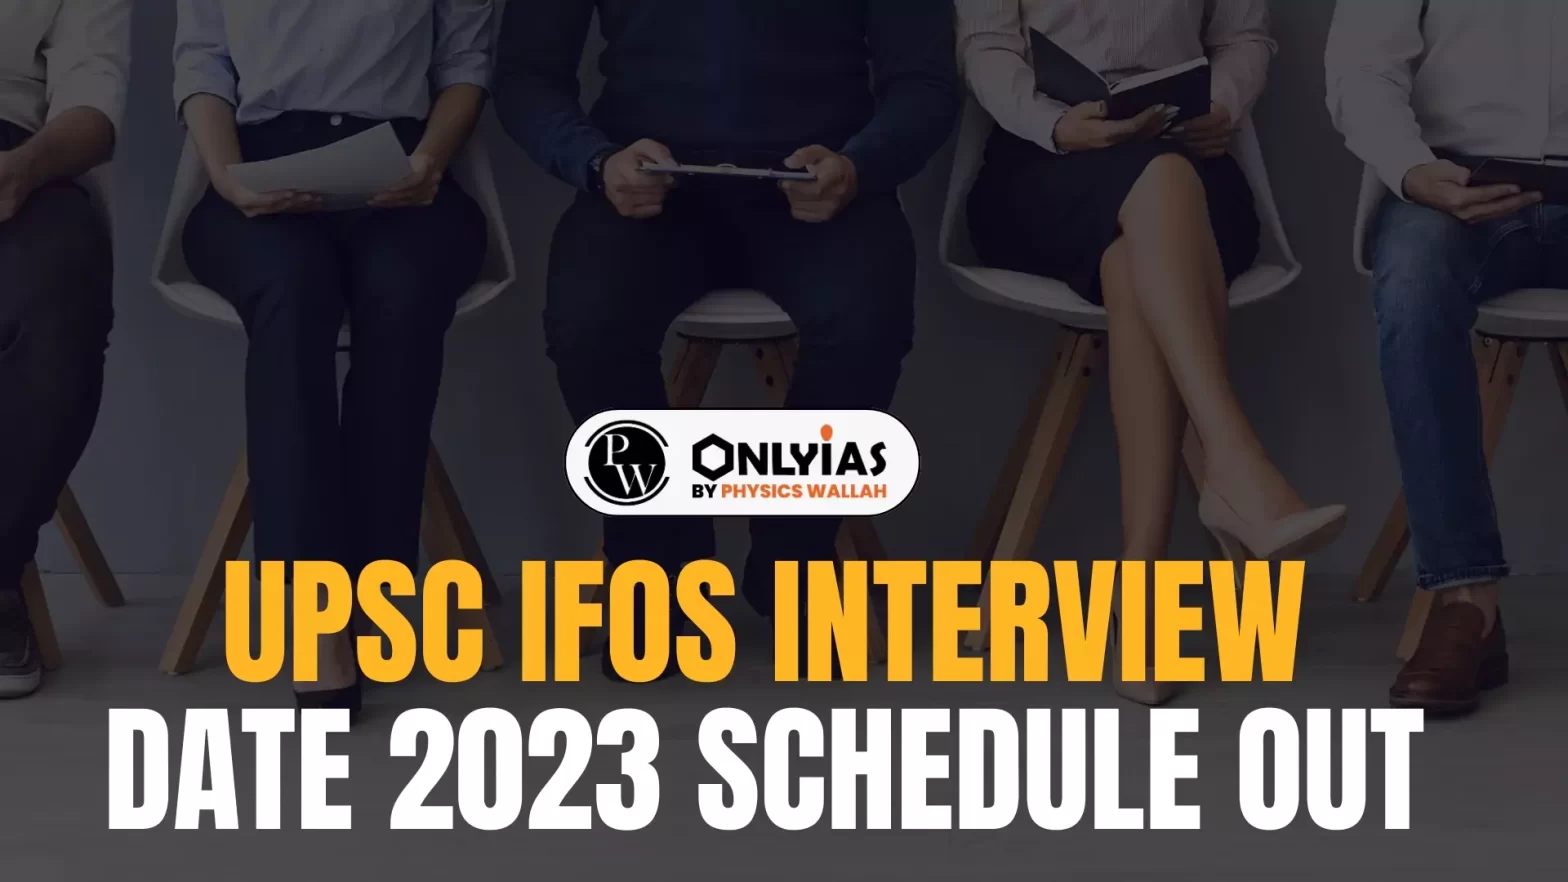 UPSC IFoS Interview Date 2023 Schedule Out